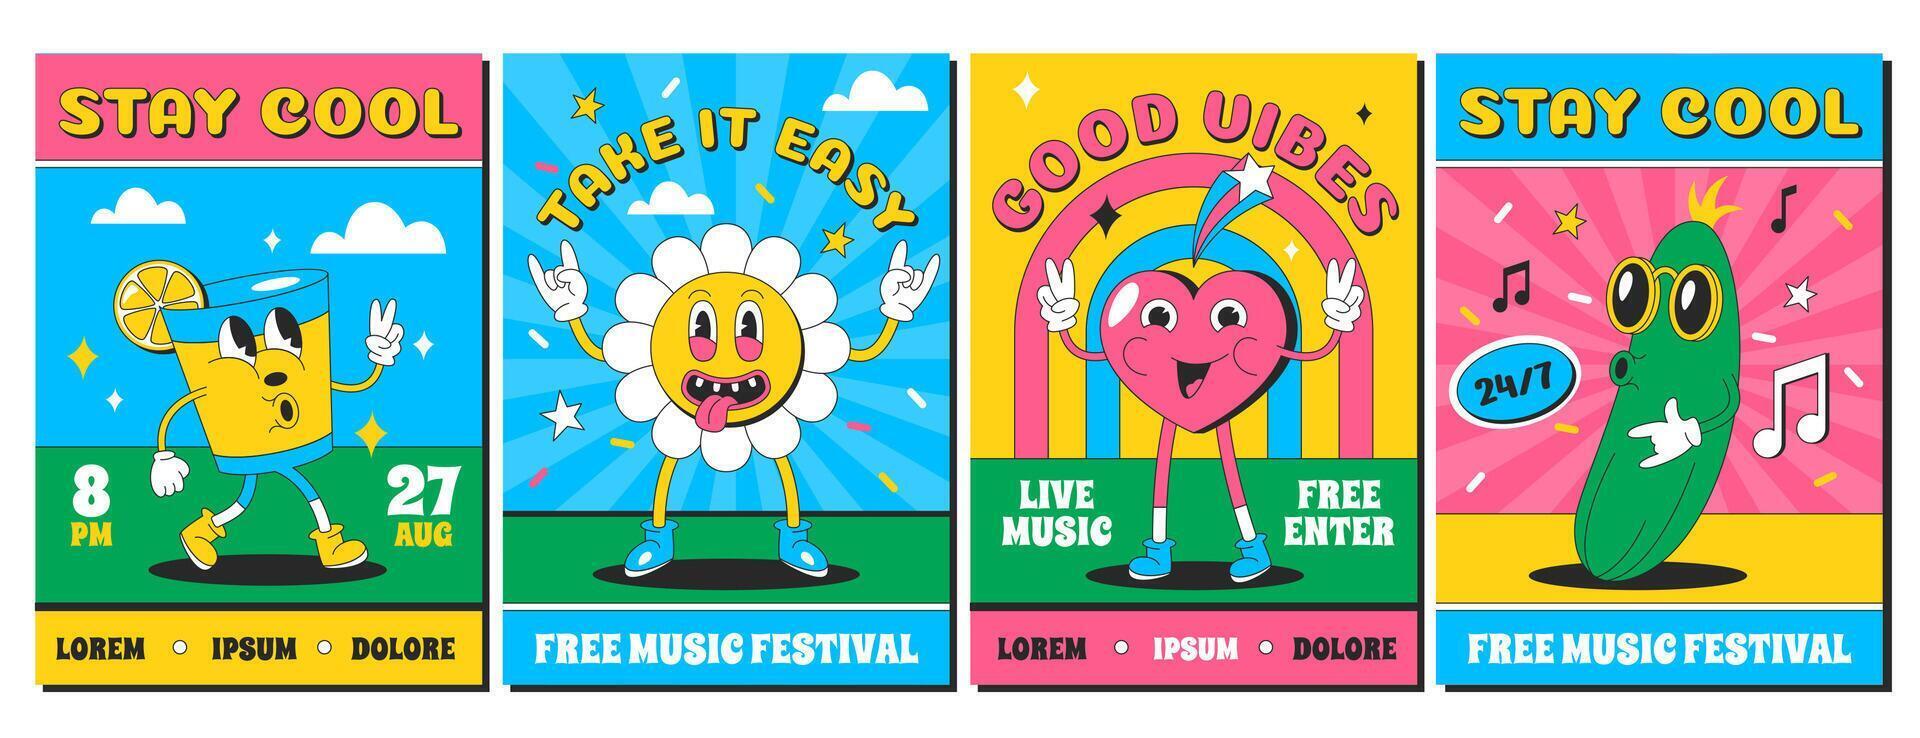 Trendy psychedelic posters with funny characters. Modern flyers or card design template with groovy daisy, heart and cocktail glass. Cartoon invitations for live music party, concert in bright colors vector